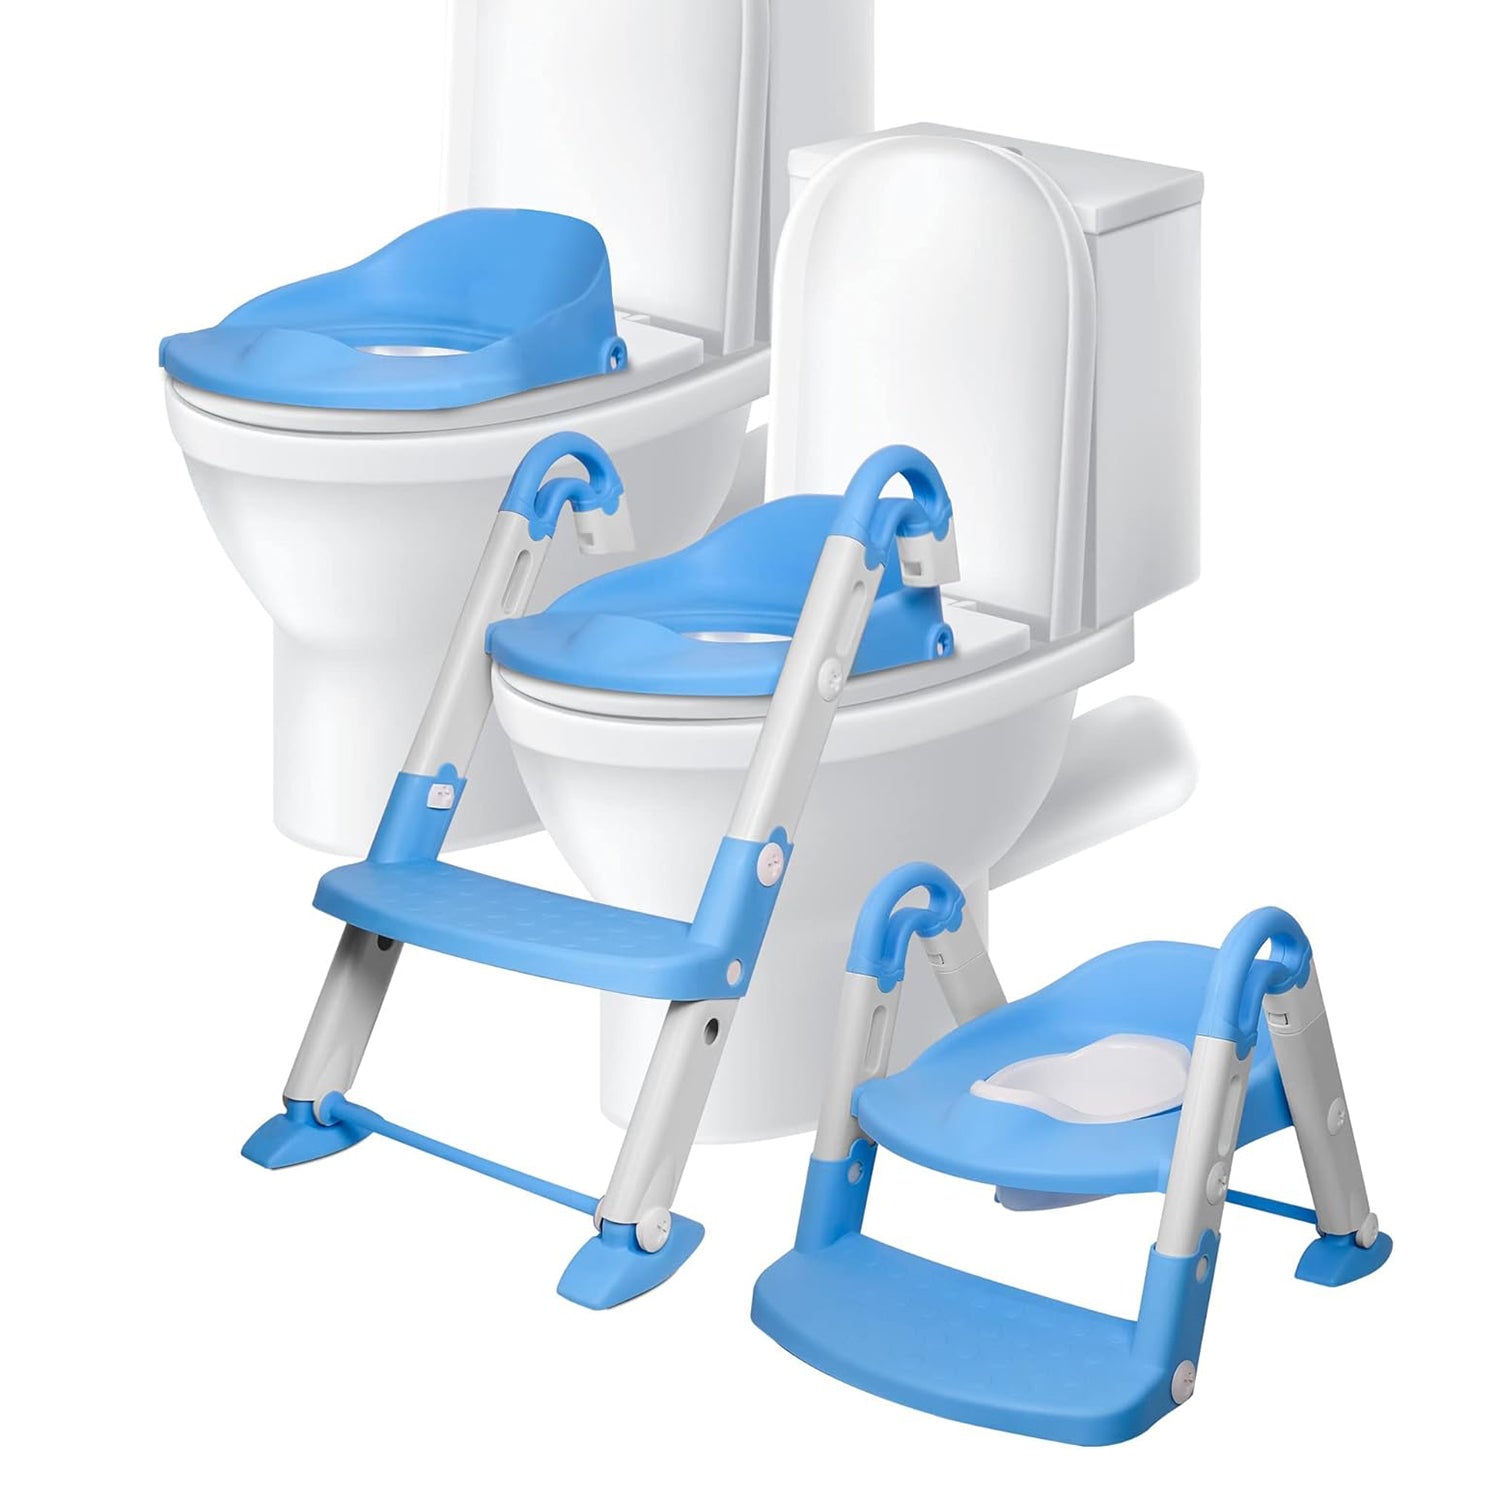 Kid's 3 in 1 Potty Training Toilet Seat with Adjustable Ladder, Blue